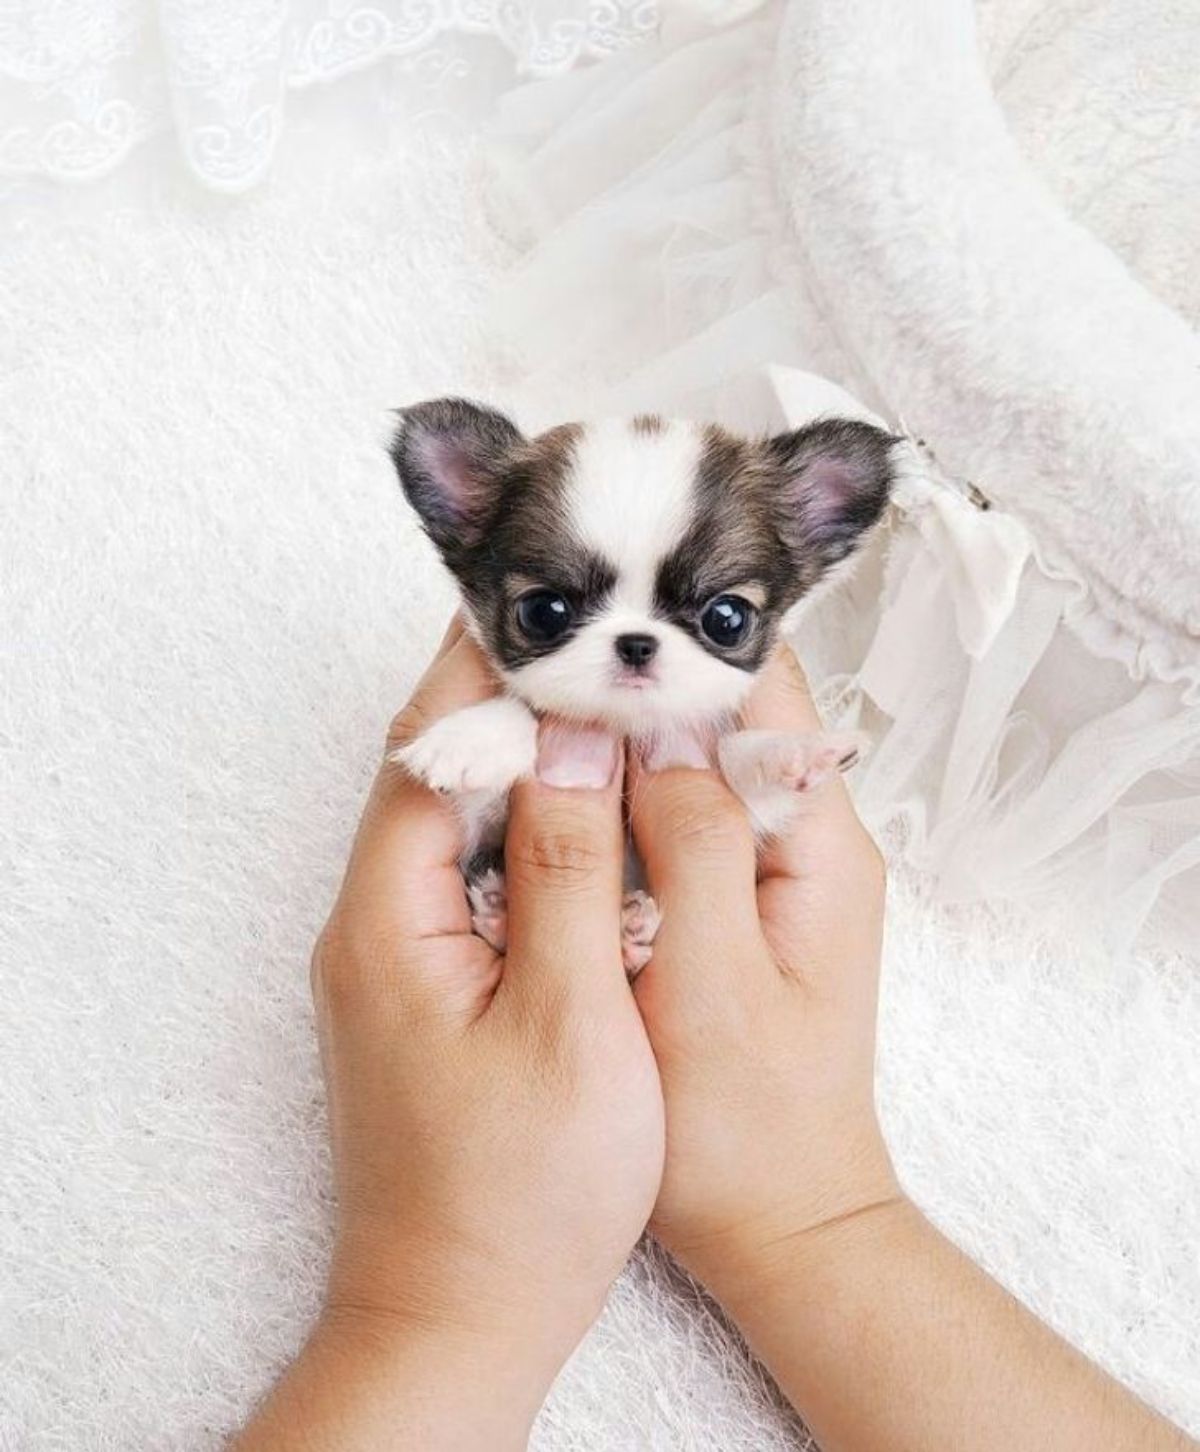 tiny white and black puppy being held in someone's hands over a white lace background